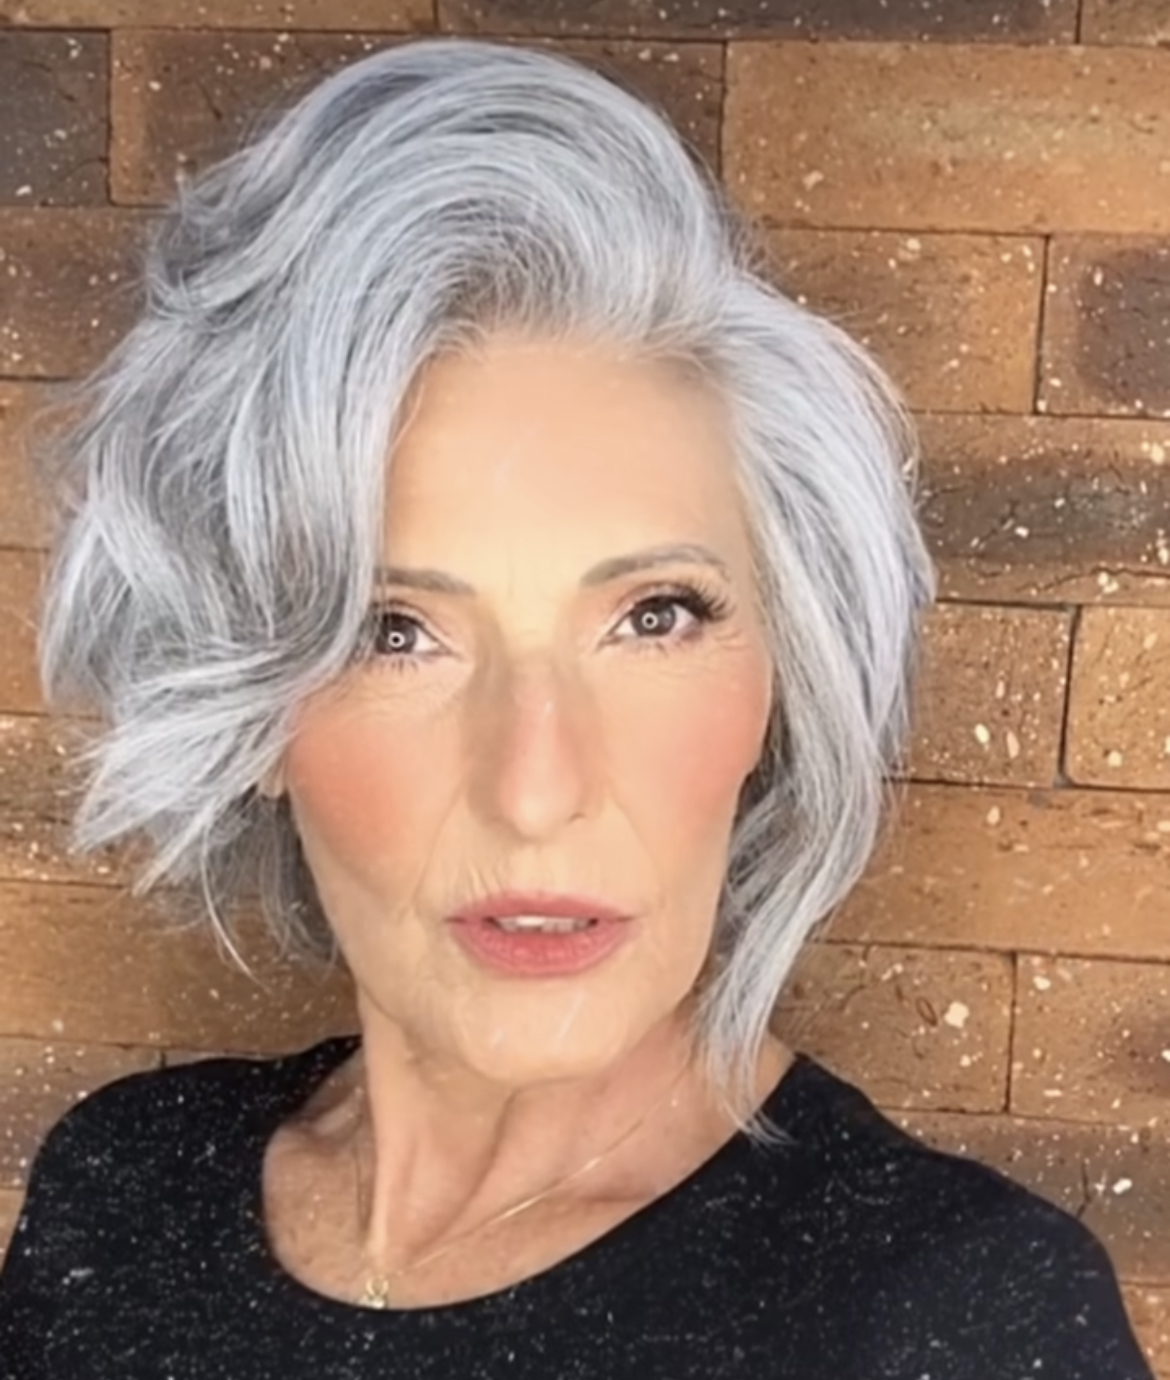 Short hairstyle for women over 40